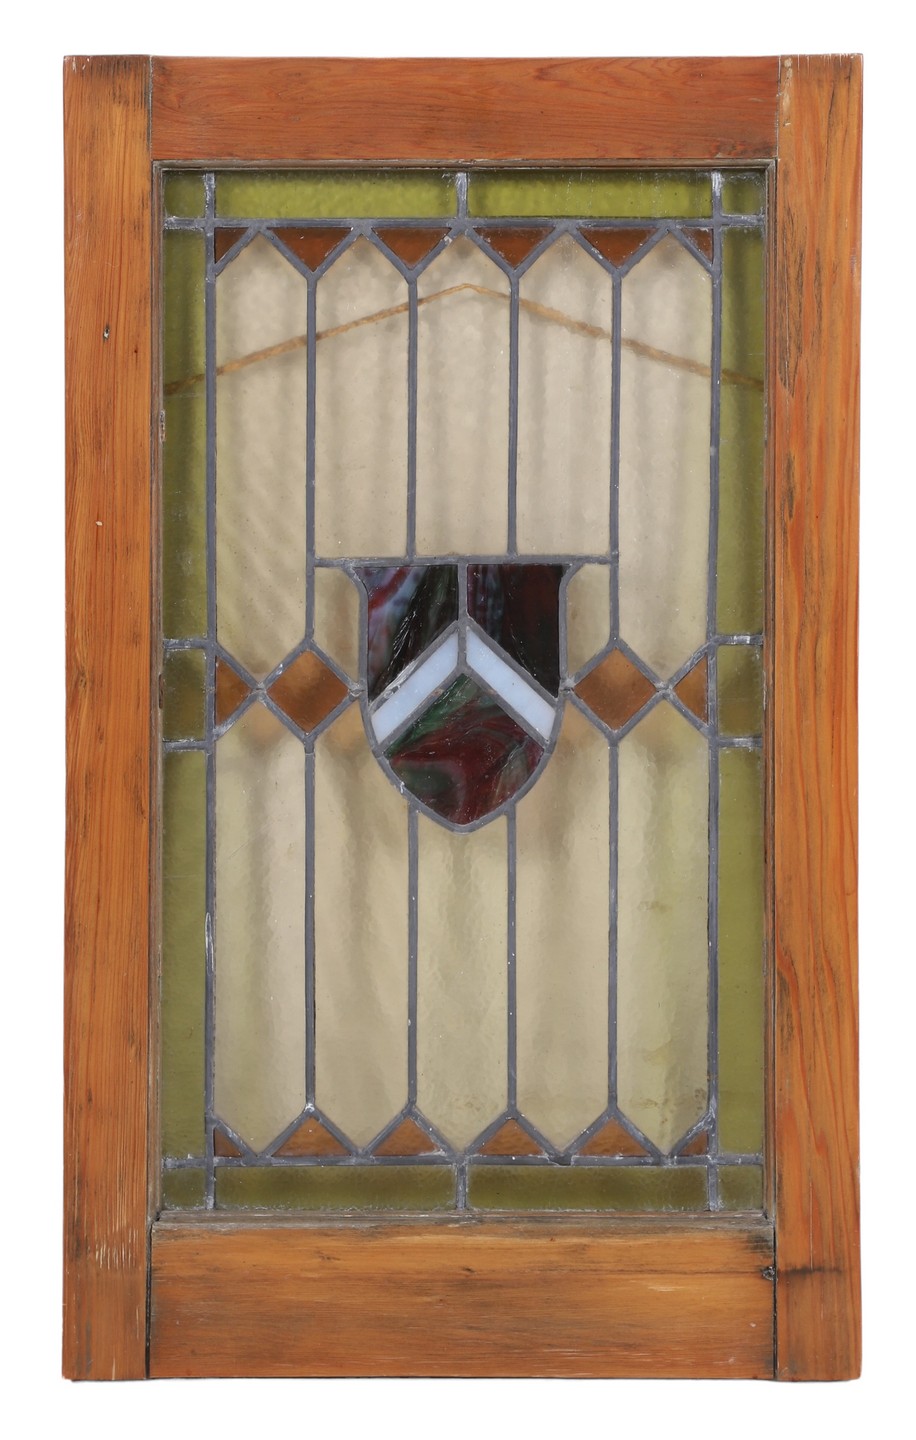 Stained glass window, wood frame, 30